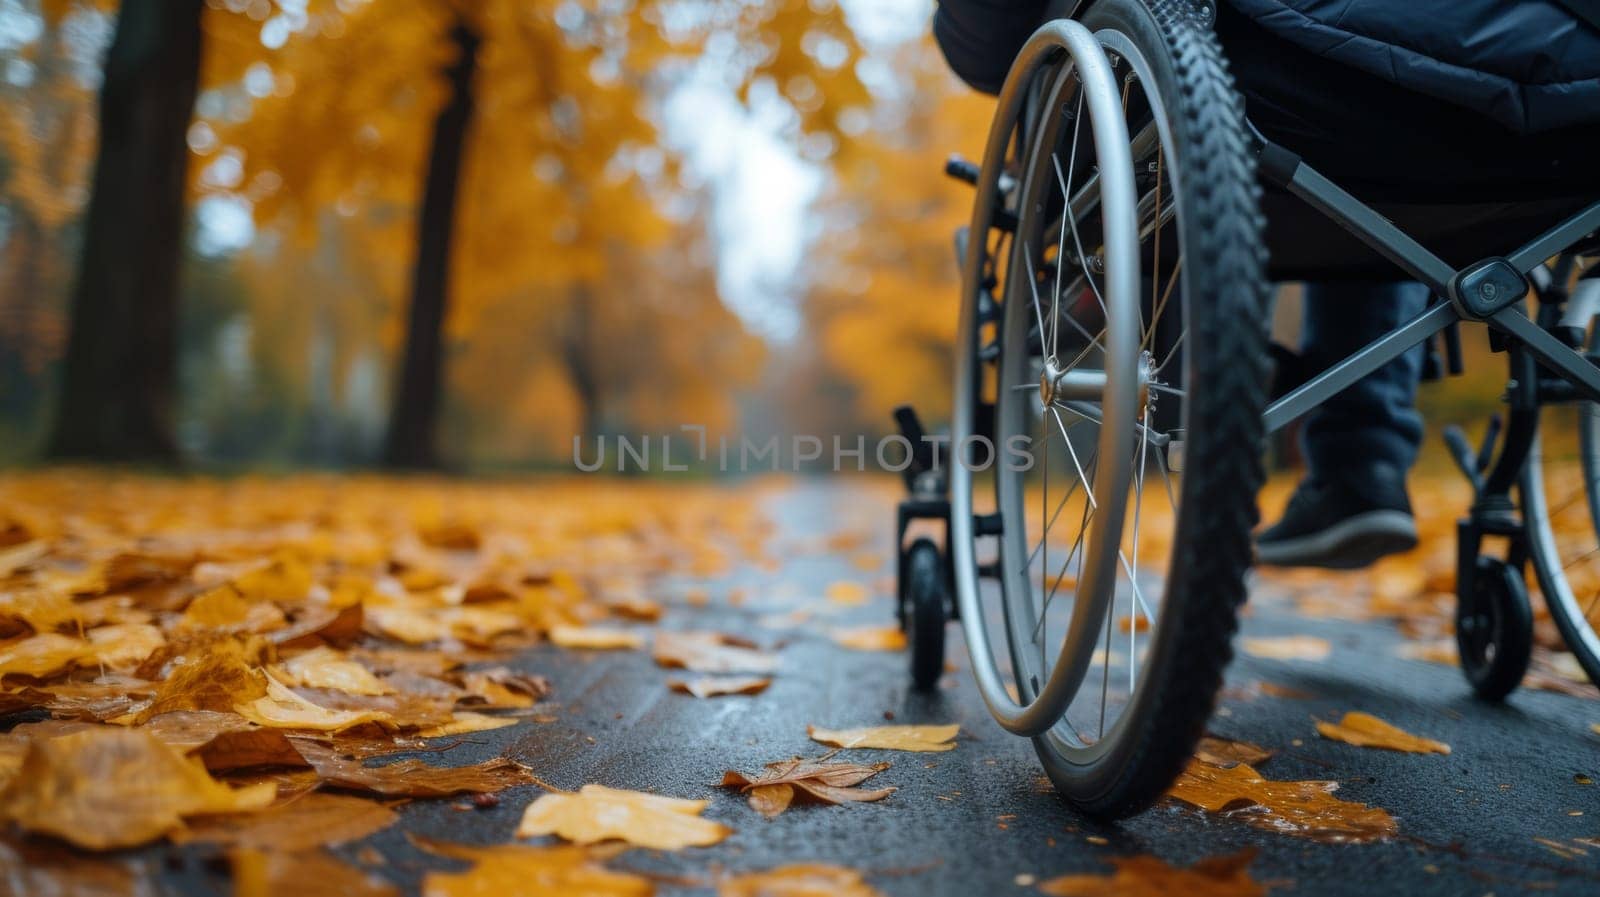 A person in a wheelchair on the road with leaves and trees